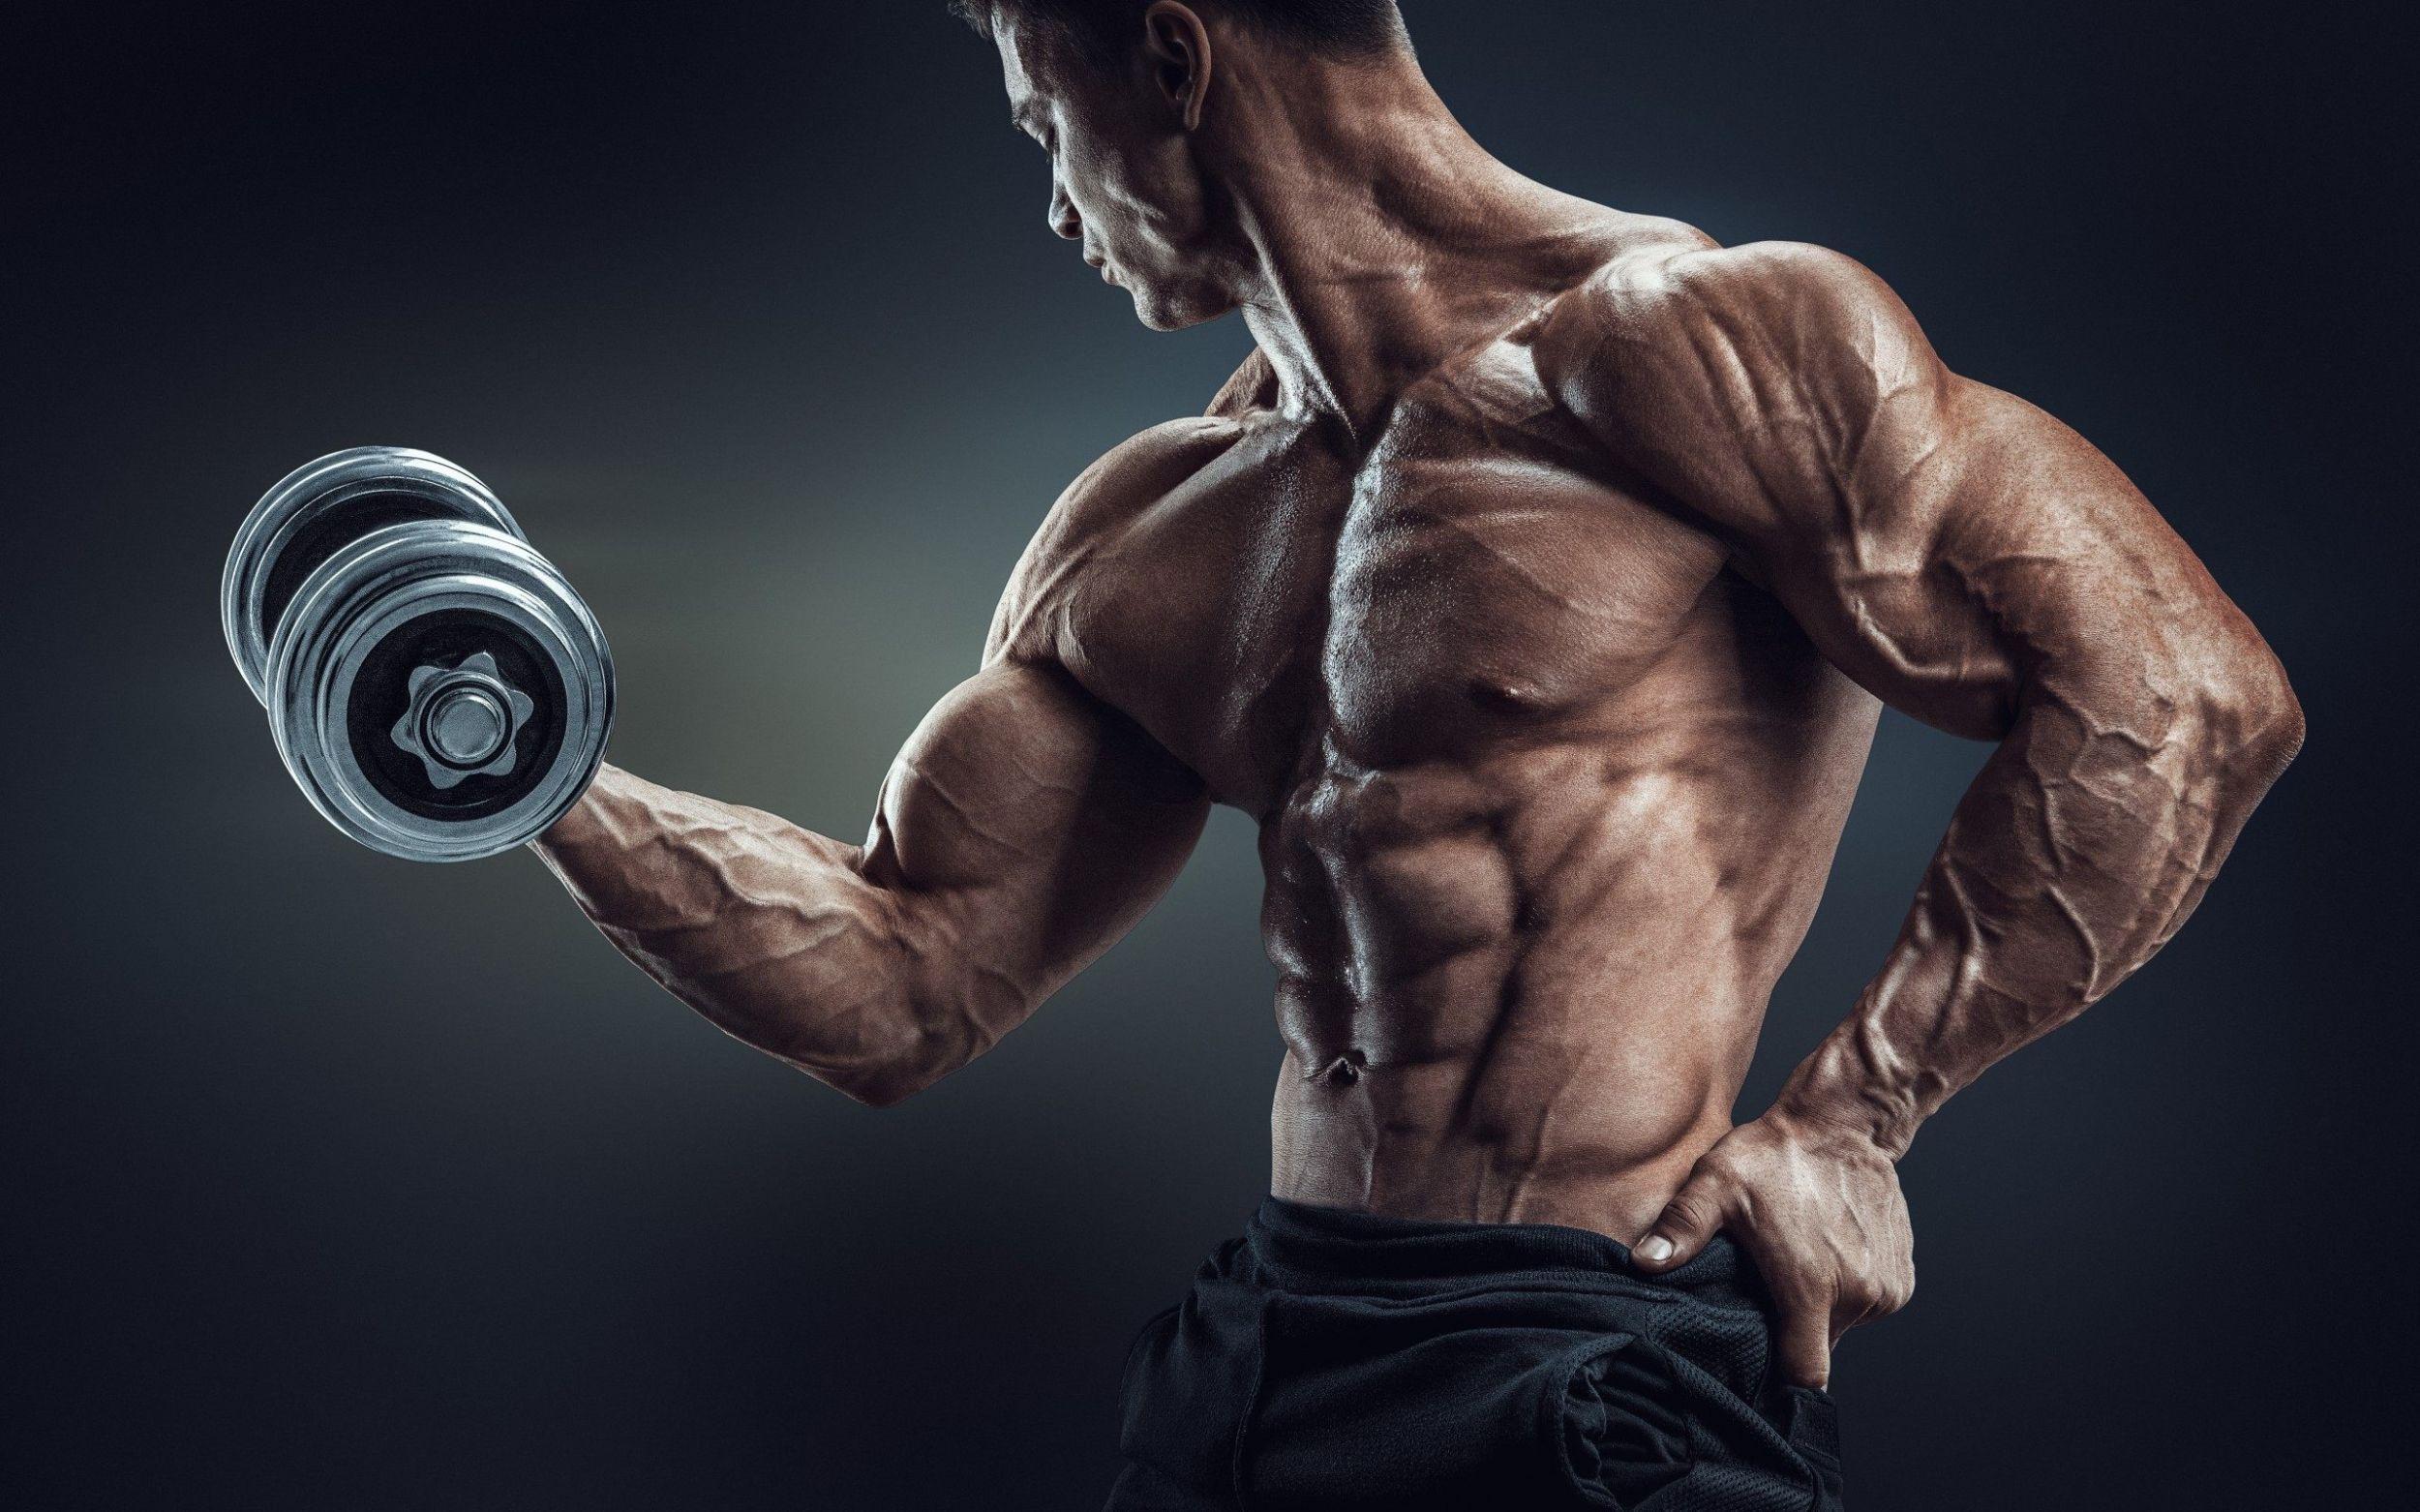 Bodybuilding Wallpaper and Image download for free